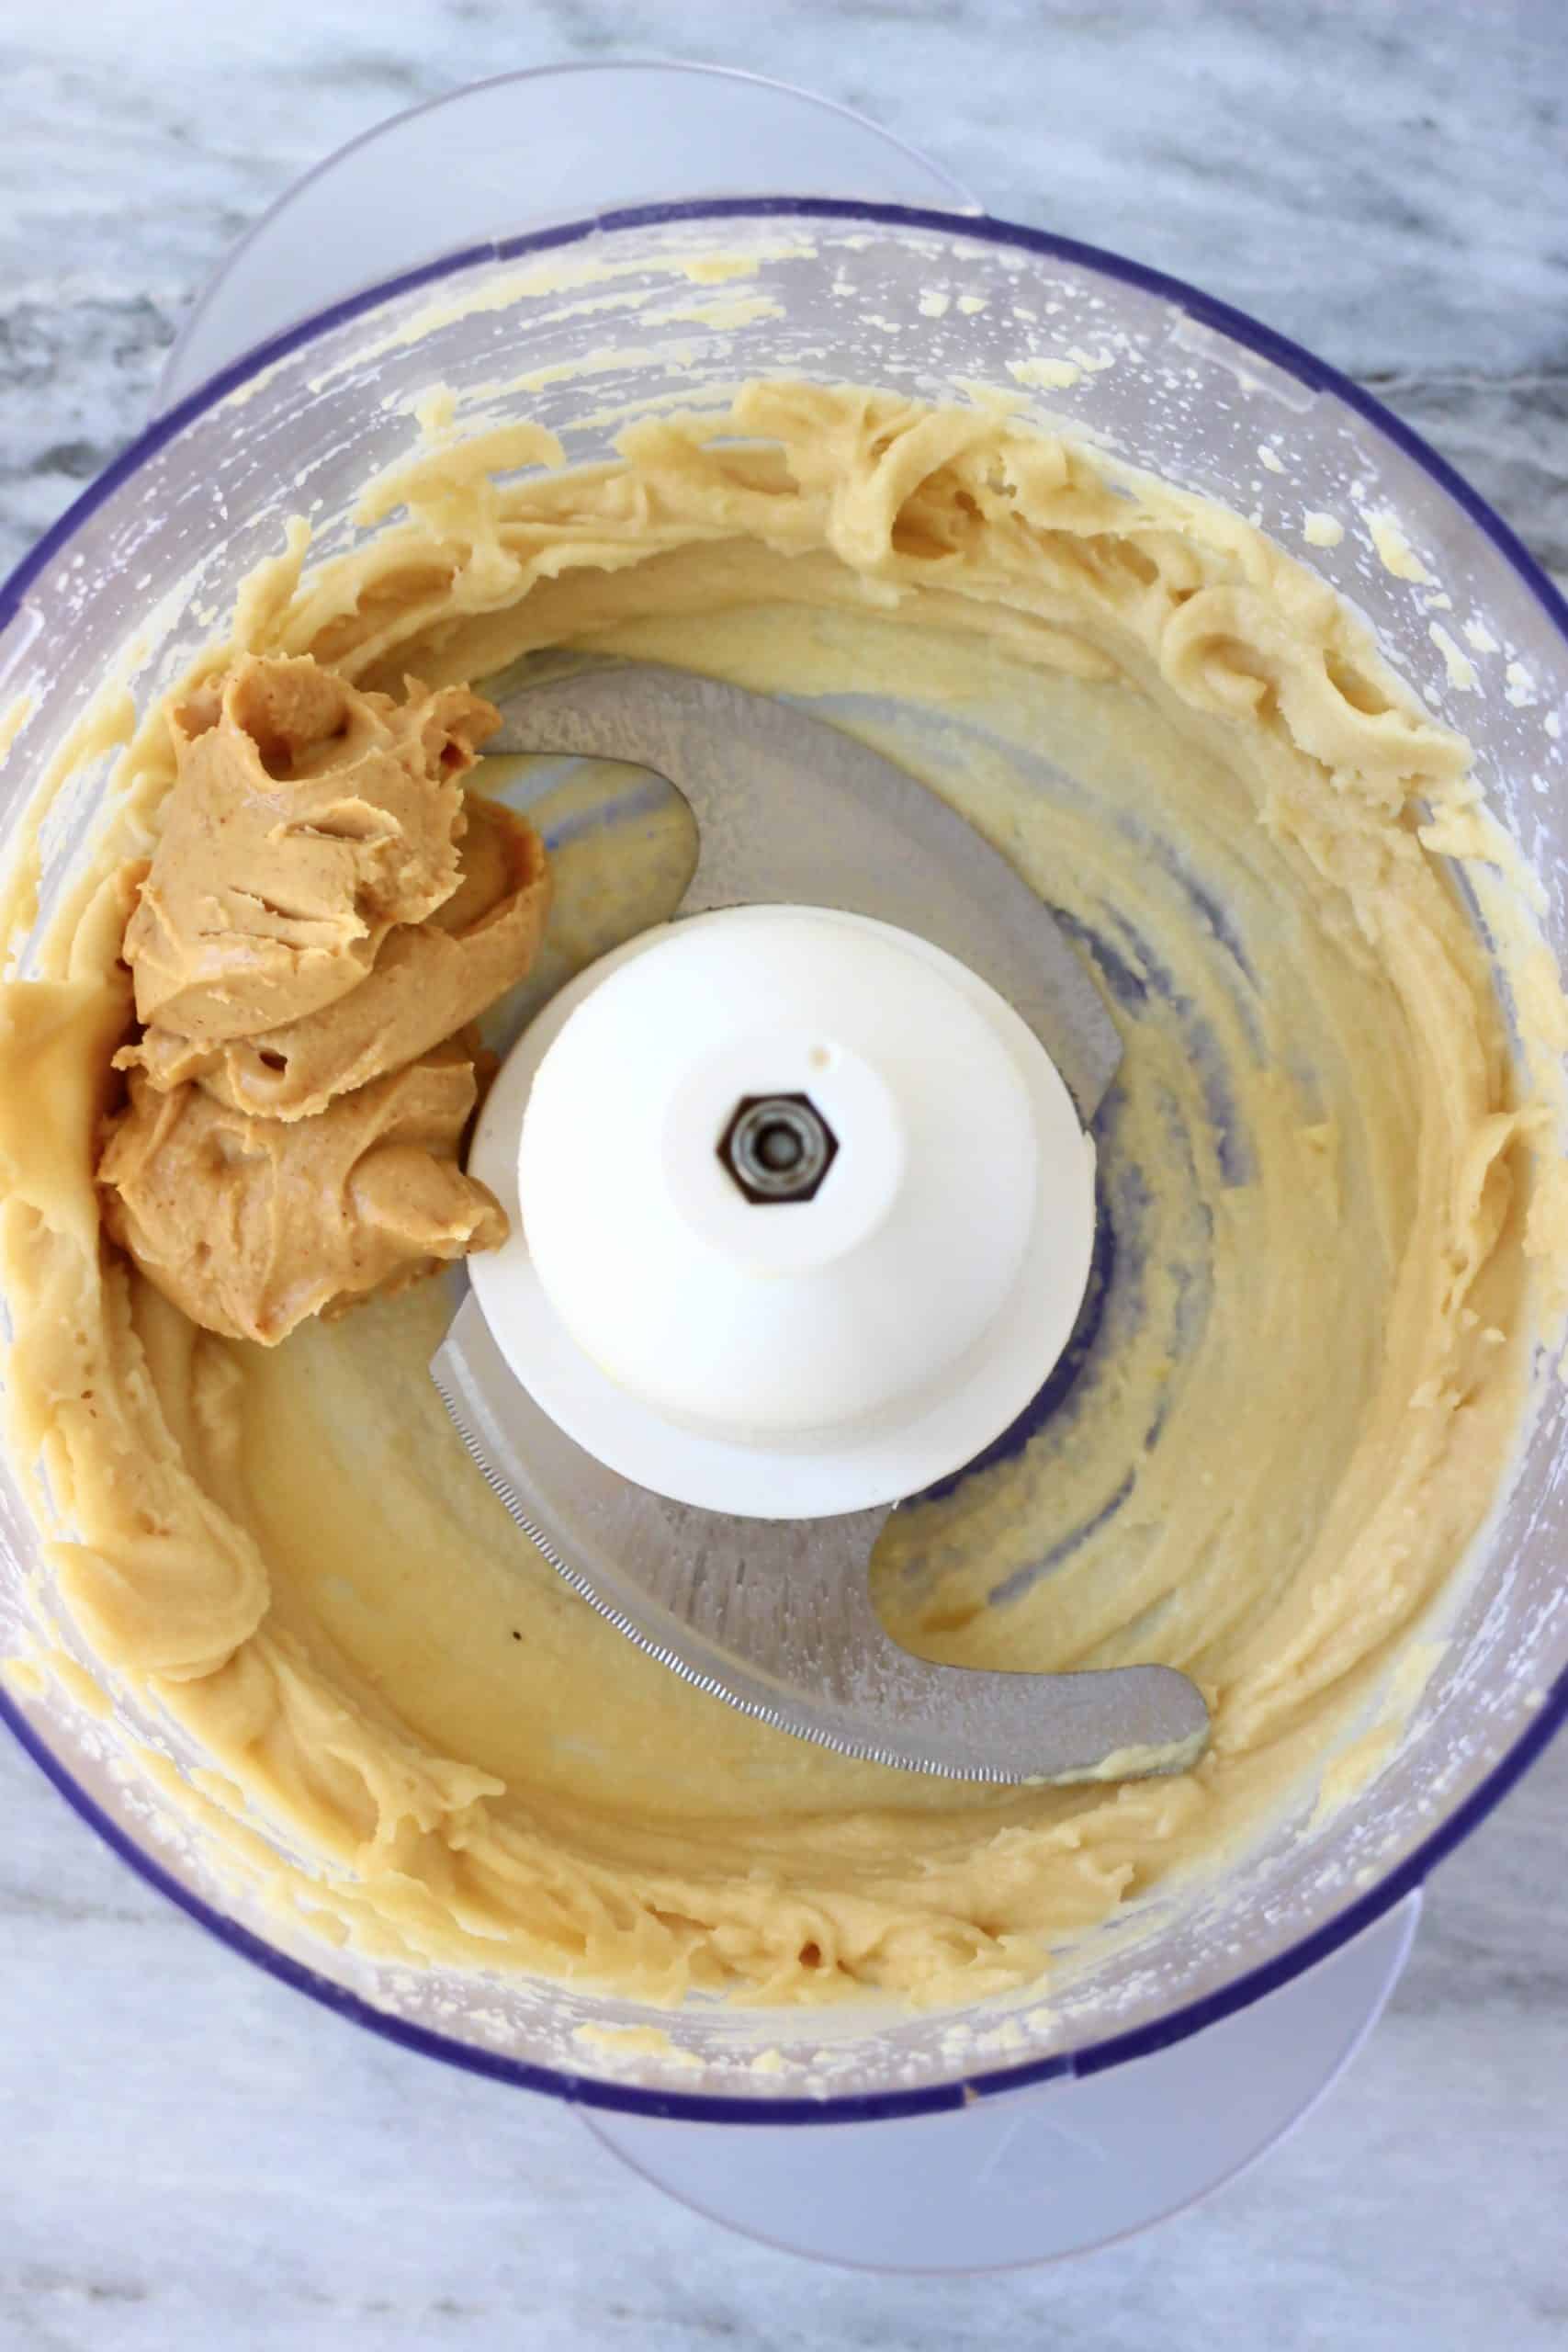 Blended up cashew nuts and peanut butter in a food processor